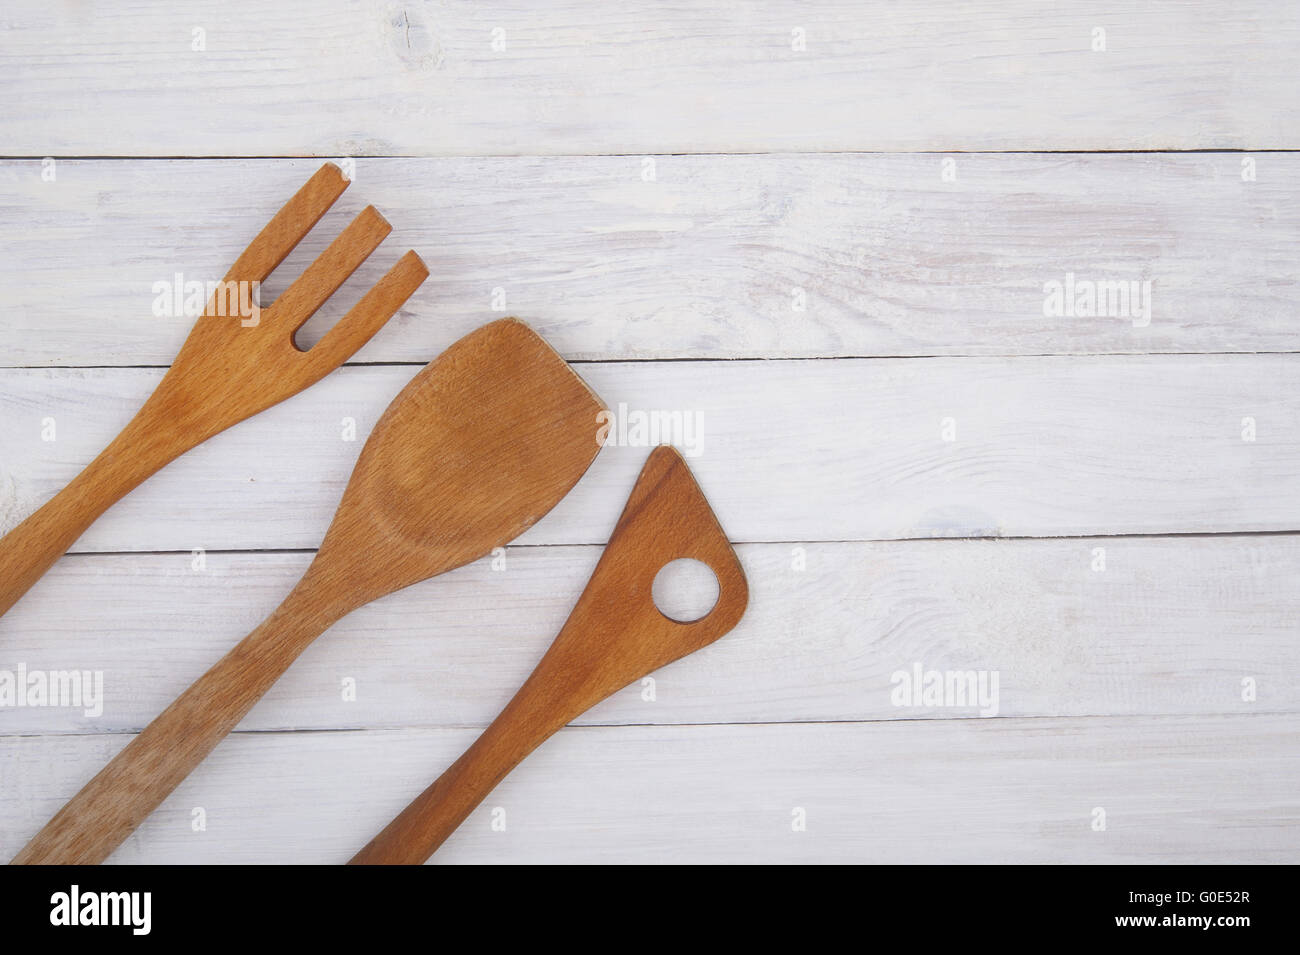 Wooden Kitchen Utensils On A Background Of White Boards Stock